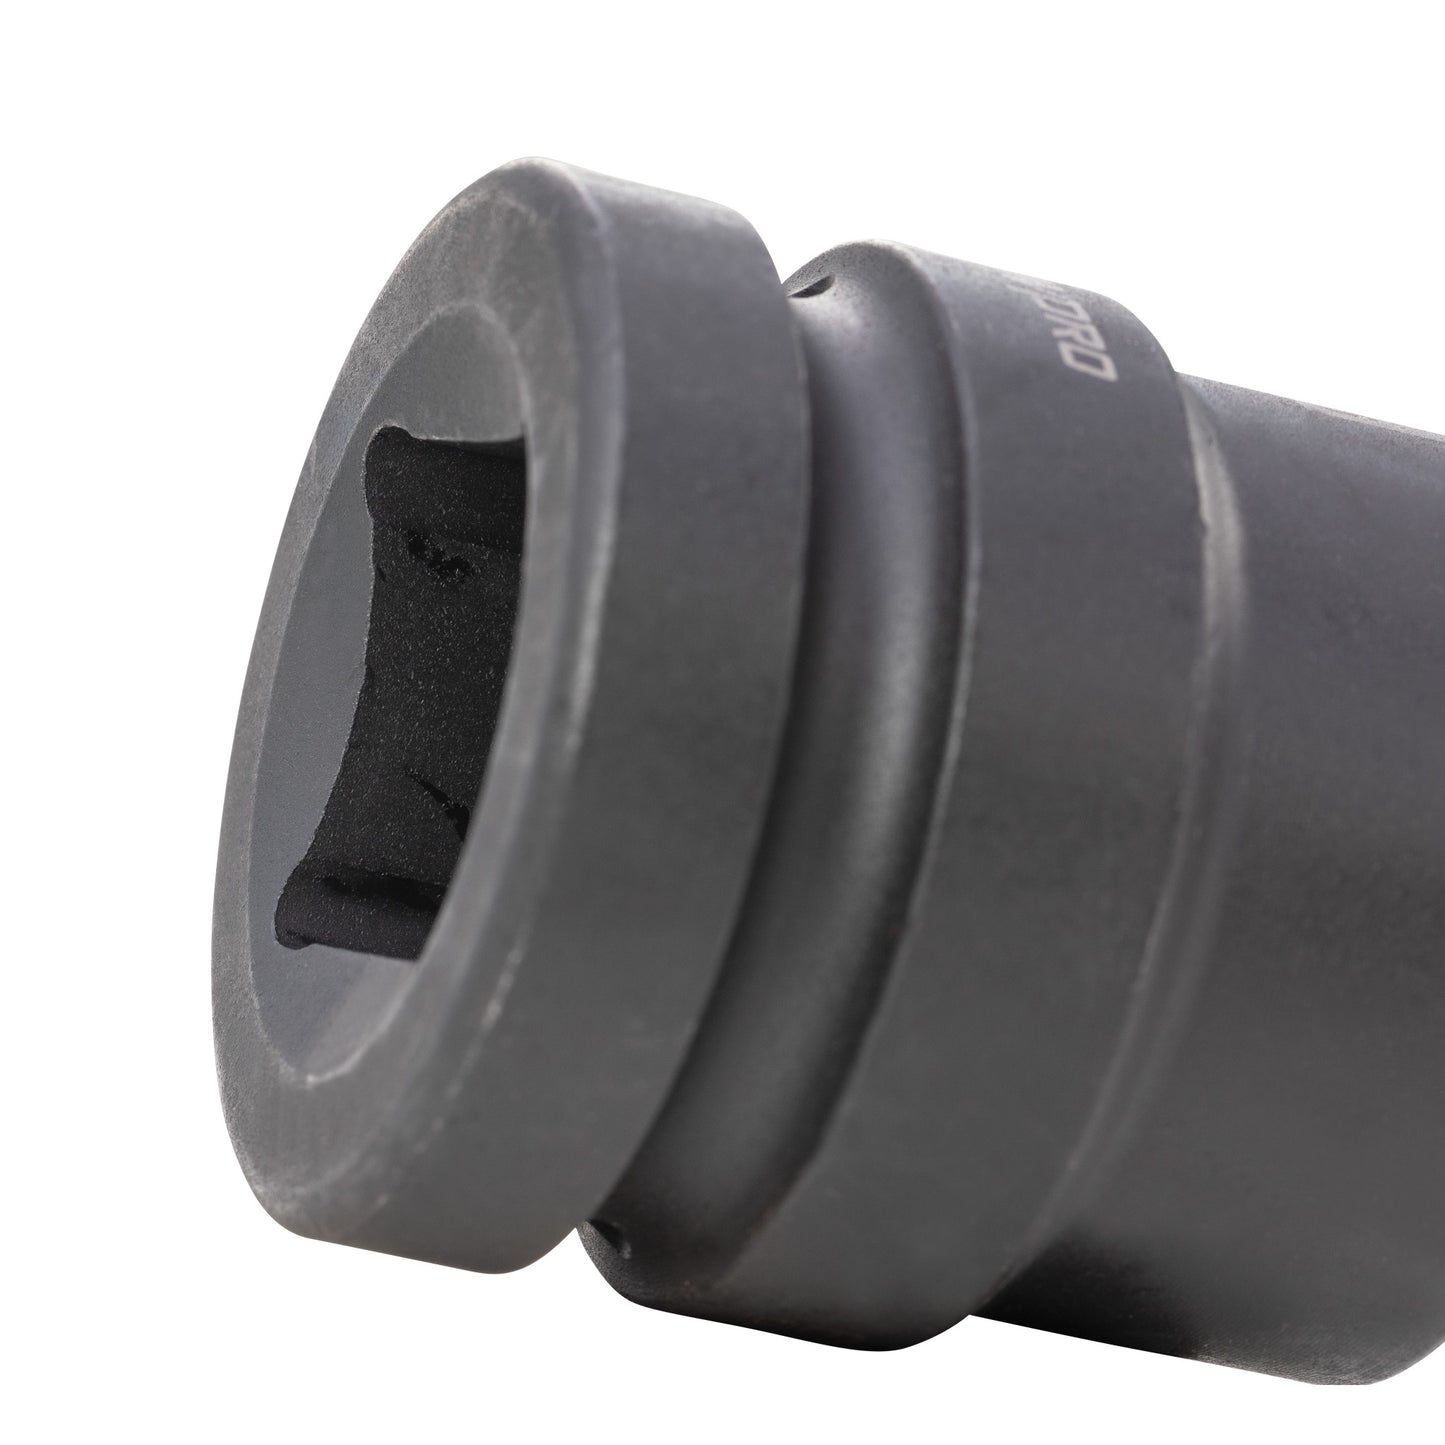 1-Inch Drive x 15/16-Inch 4-Point Square Budd Impact Socket